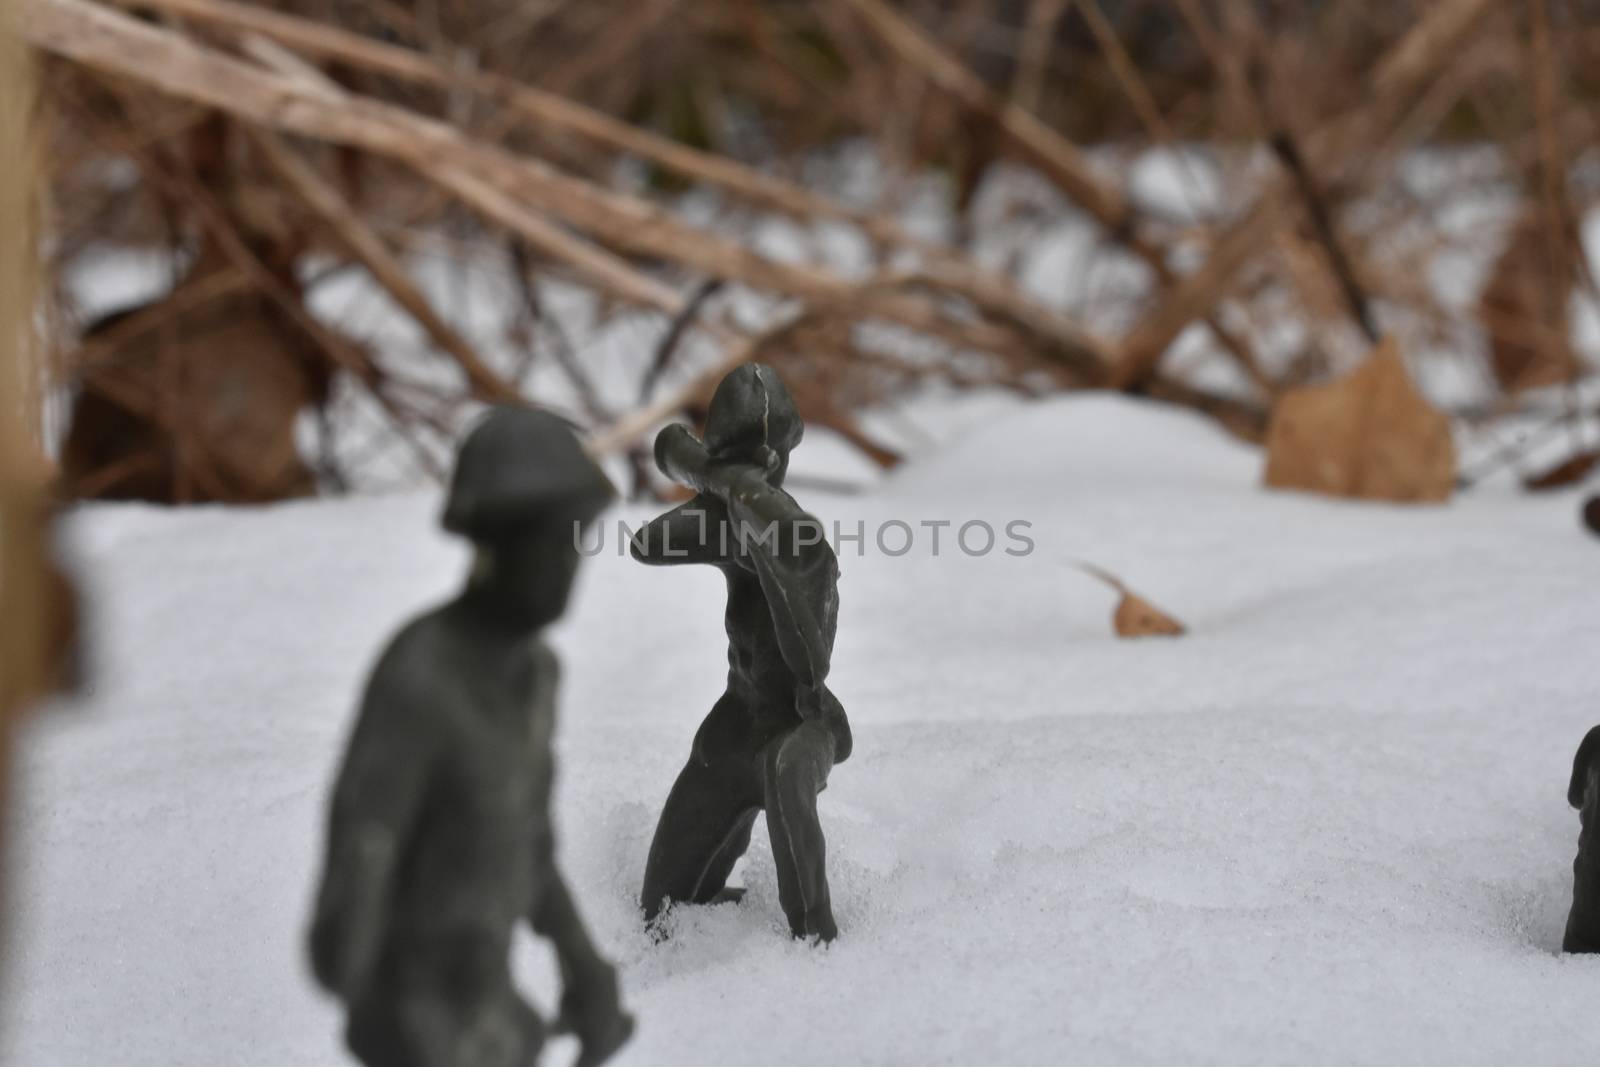 A Toy Soldier Taking Aim and Ready to Fight in Knee-Deep Snow